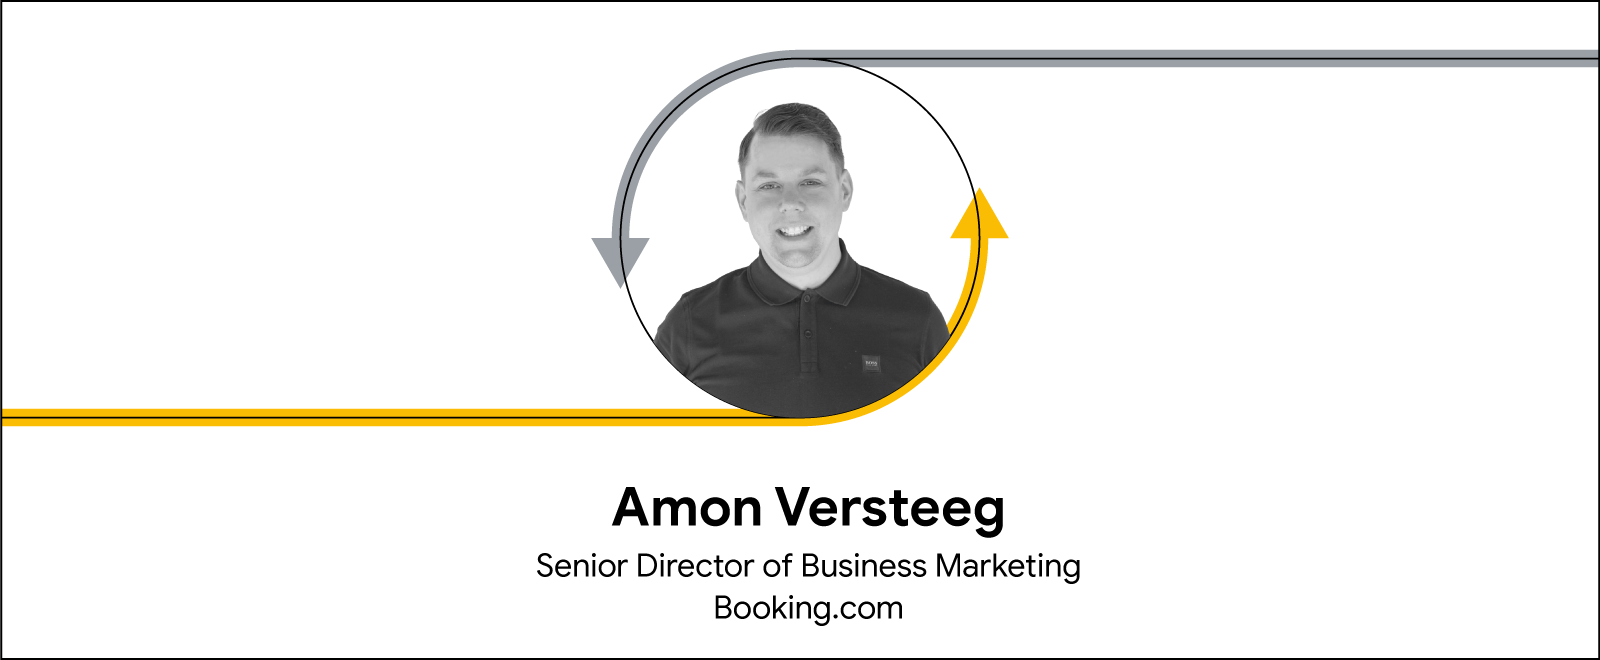 Headshot of Amon Vesteeg, Senior Director of Business Marketing, Booking.com with grey and yellow arrows around it.